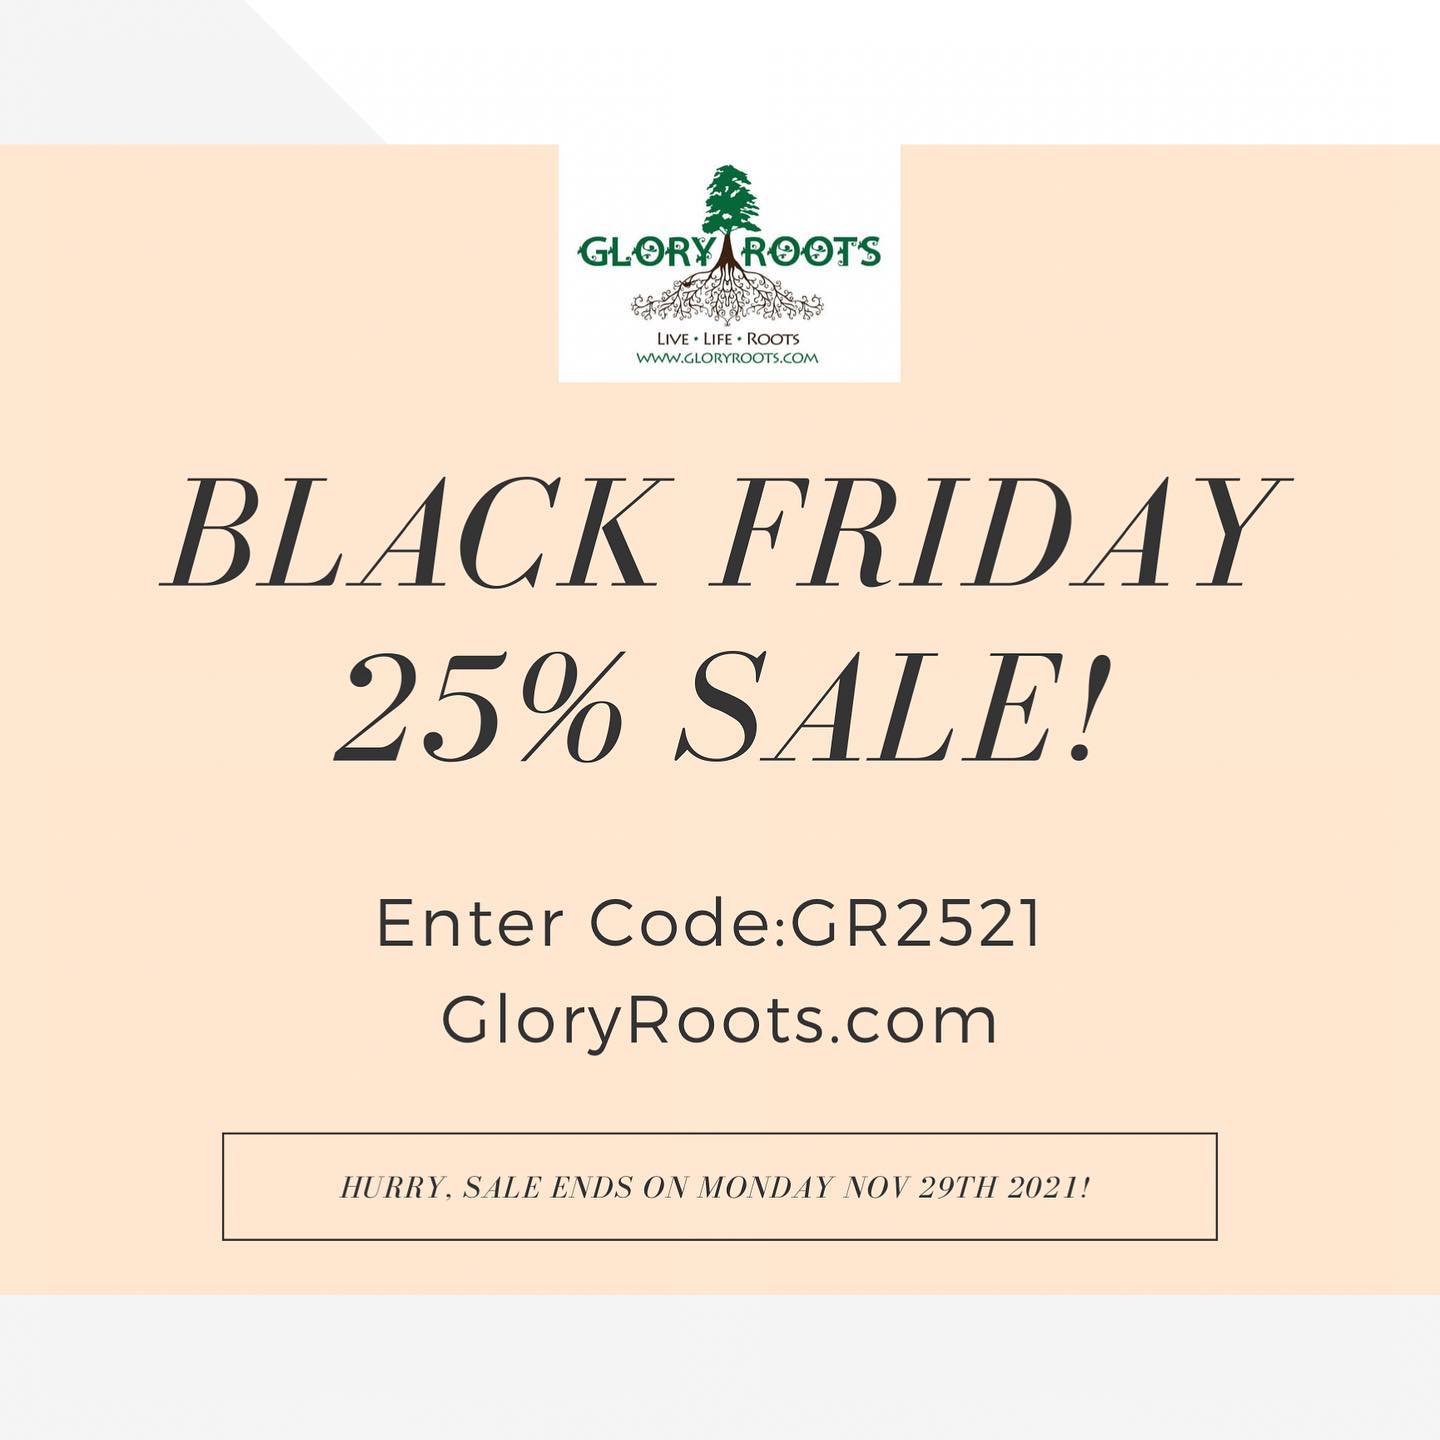 Black Friday 25% Off‼️
Use code GR2521 on GloryRoots.com
Offer ends Monday 29th Nov‼️

#GloryRoots #BlackFriday #Sale #PromoCode #WorldwideShipping